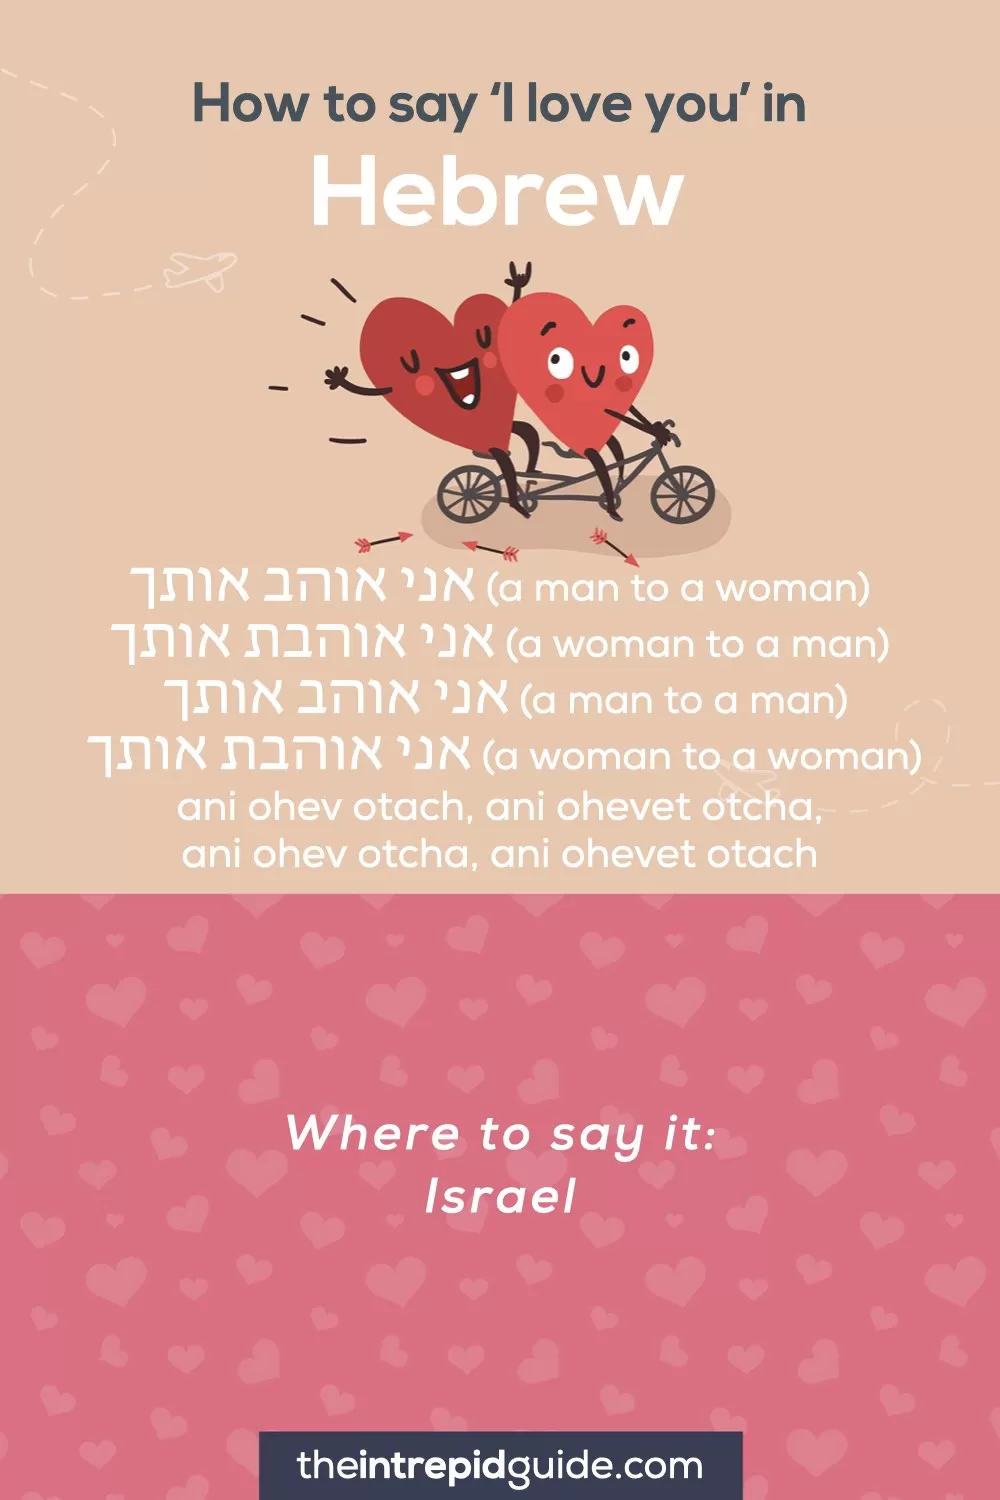 How to say I love you in different languages - Hebrew - אני אוהב אותך